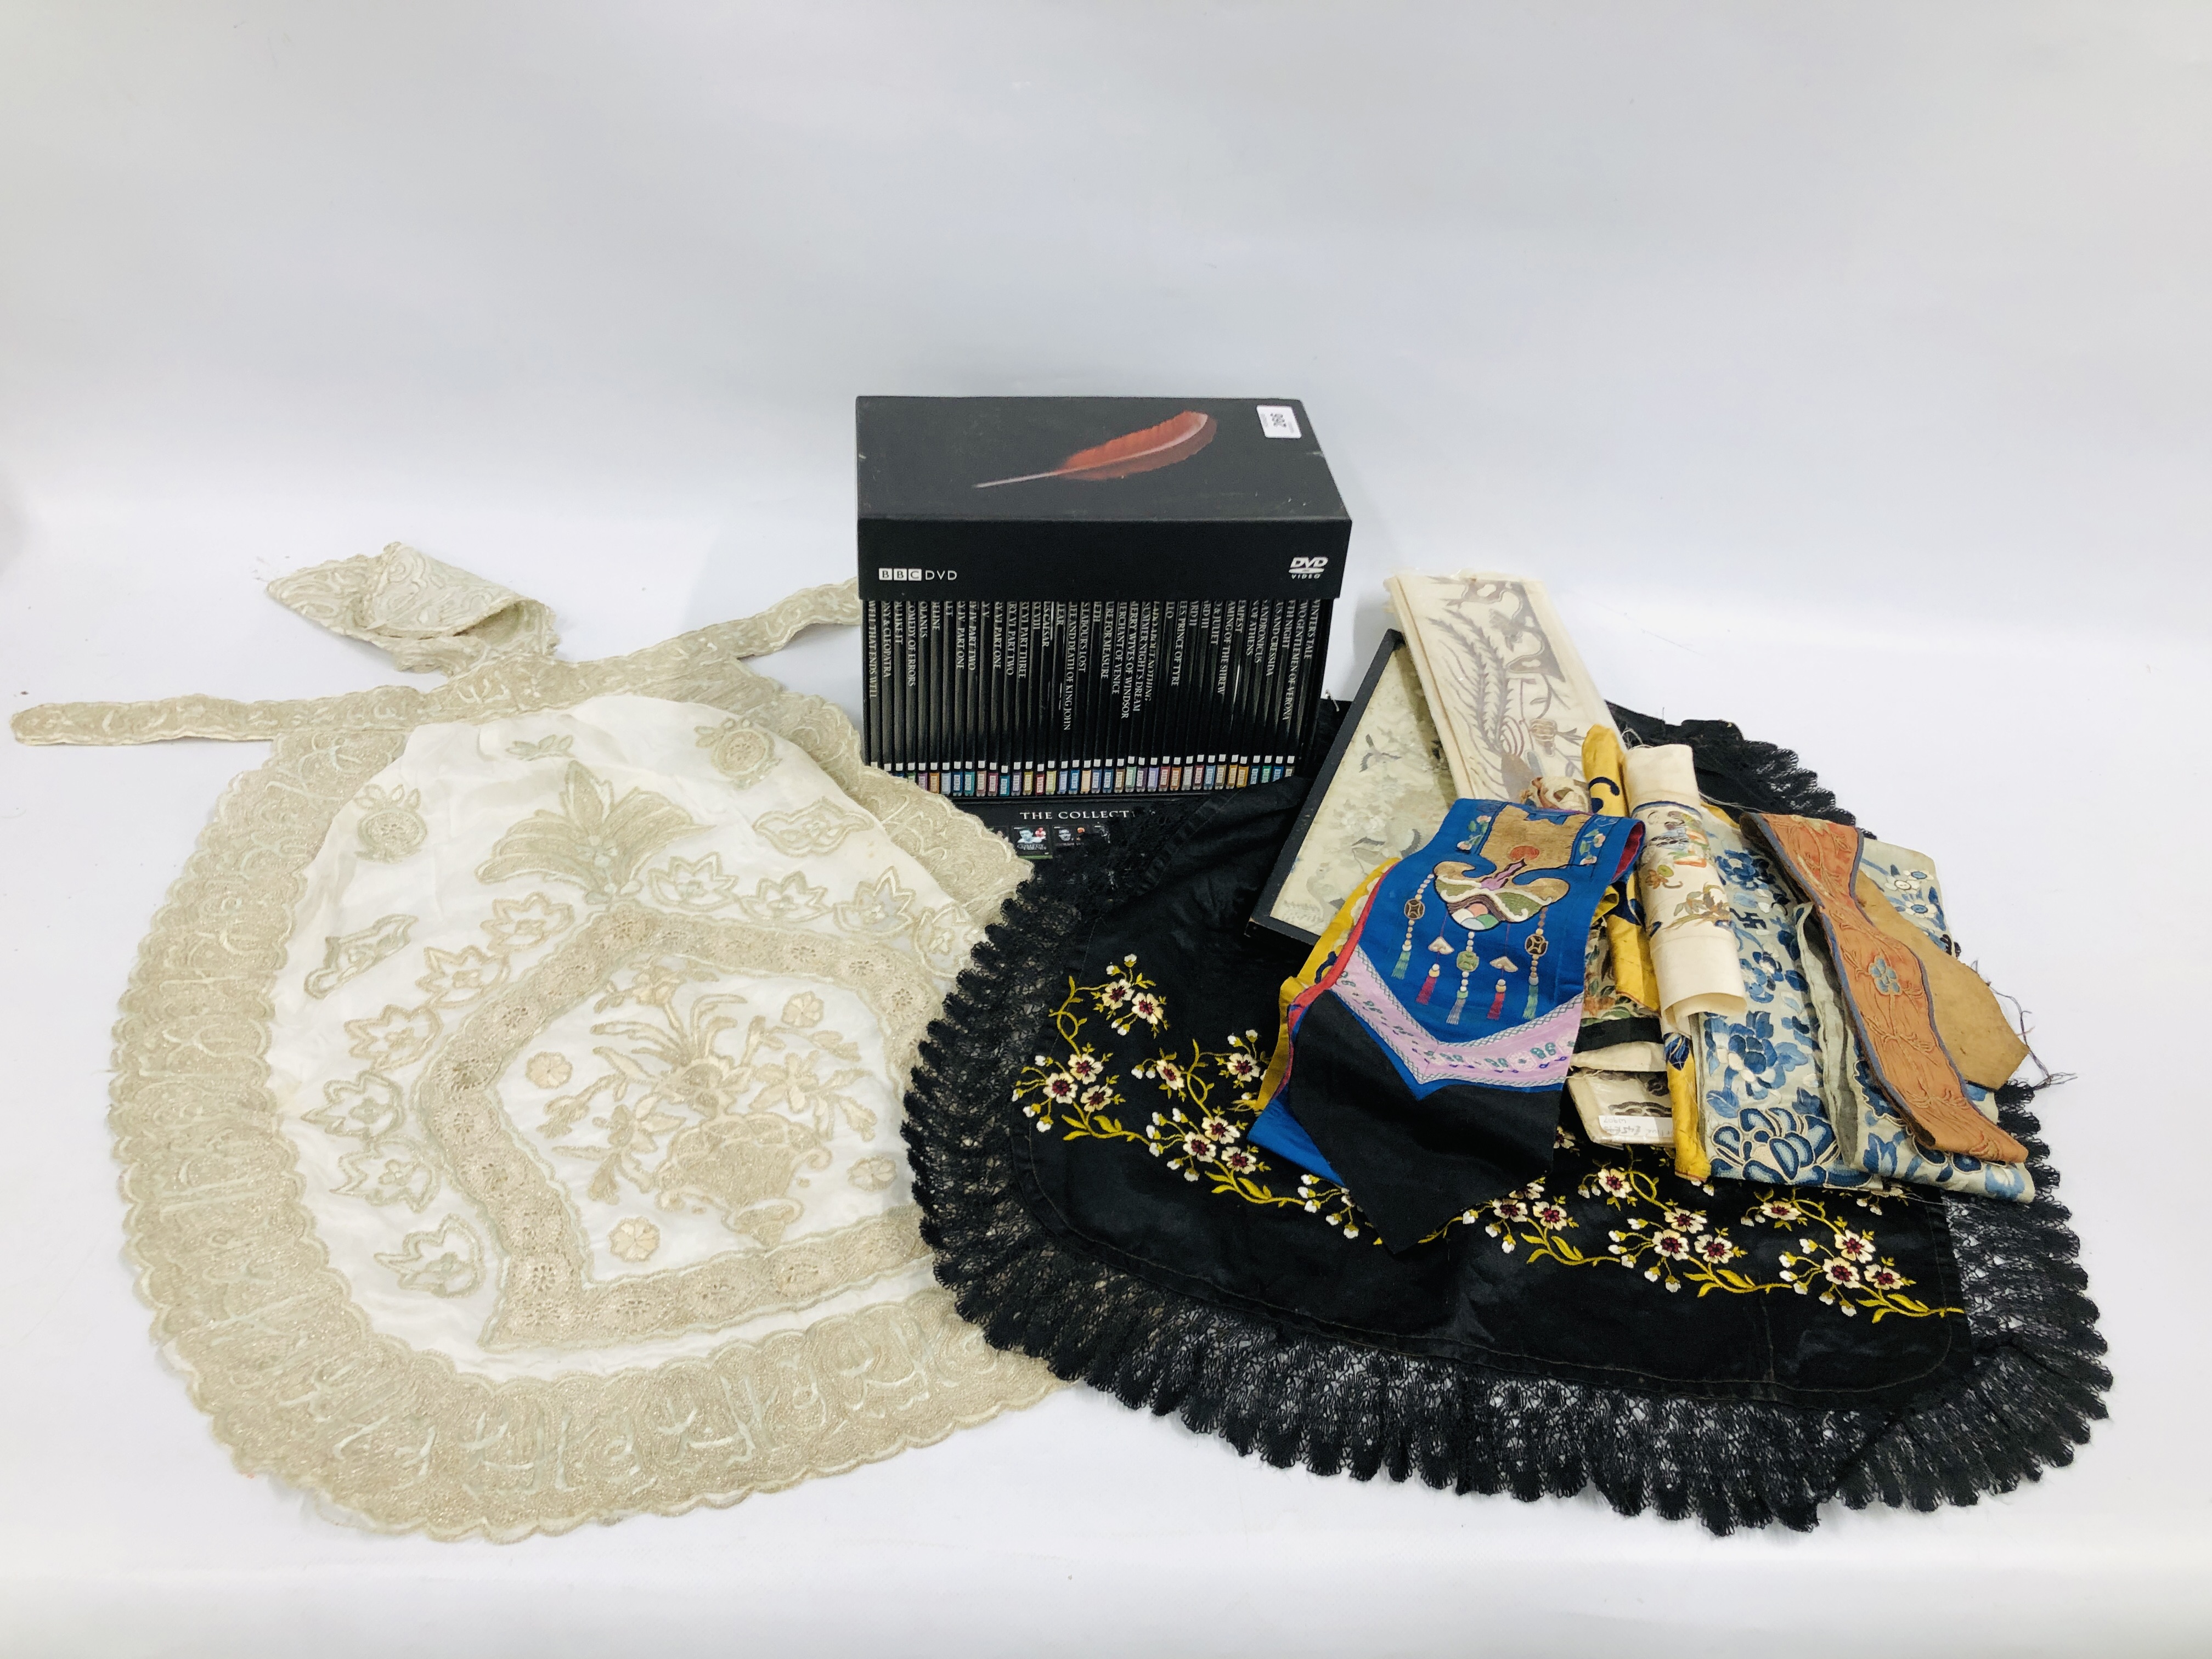 AN ELABORATE SILK AND LACE PANEL IN AN APRON STYLE WOVEN WITH AN INTRICATE FLORAL PATTERN ALONG